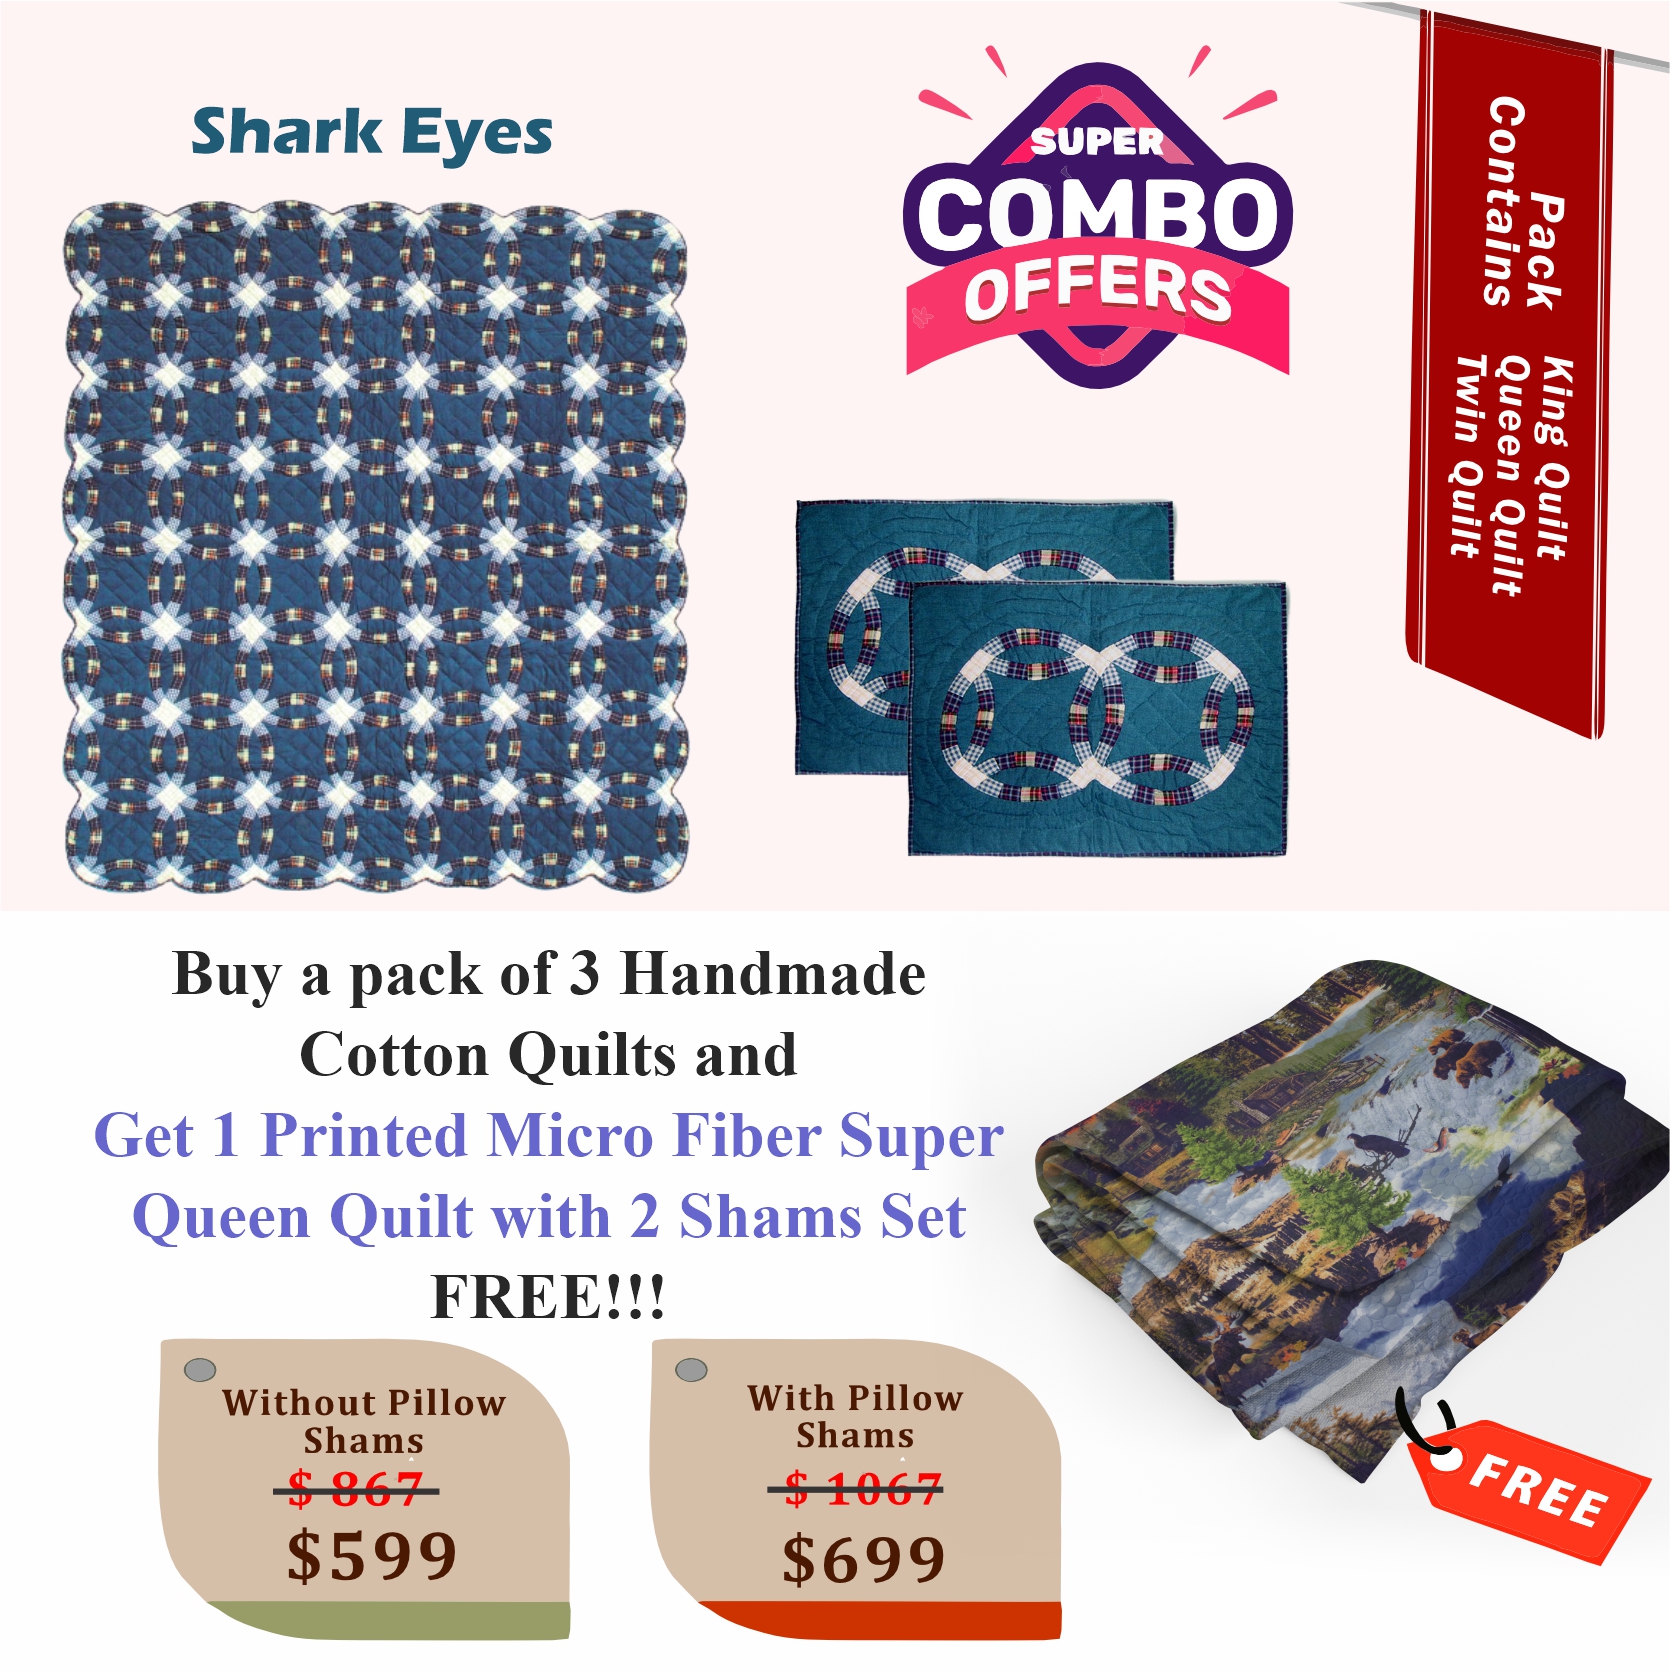 Shark Eyes- Handmade Cotton quilts | Matching pillow shams | Buy 3 cotton quilts and get 1 Printed Microfiber Super Queen Quilt with 2 Shams set FREE